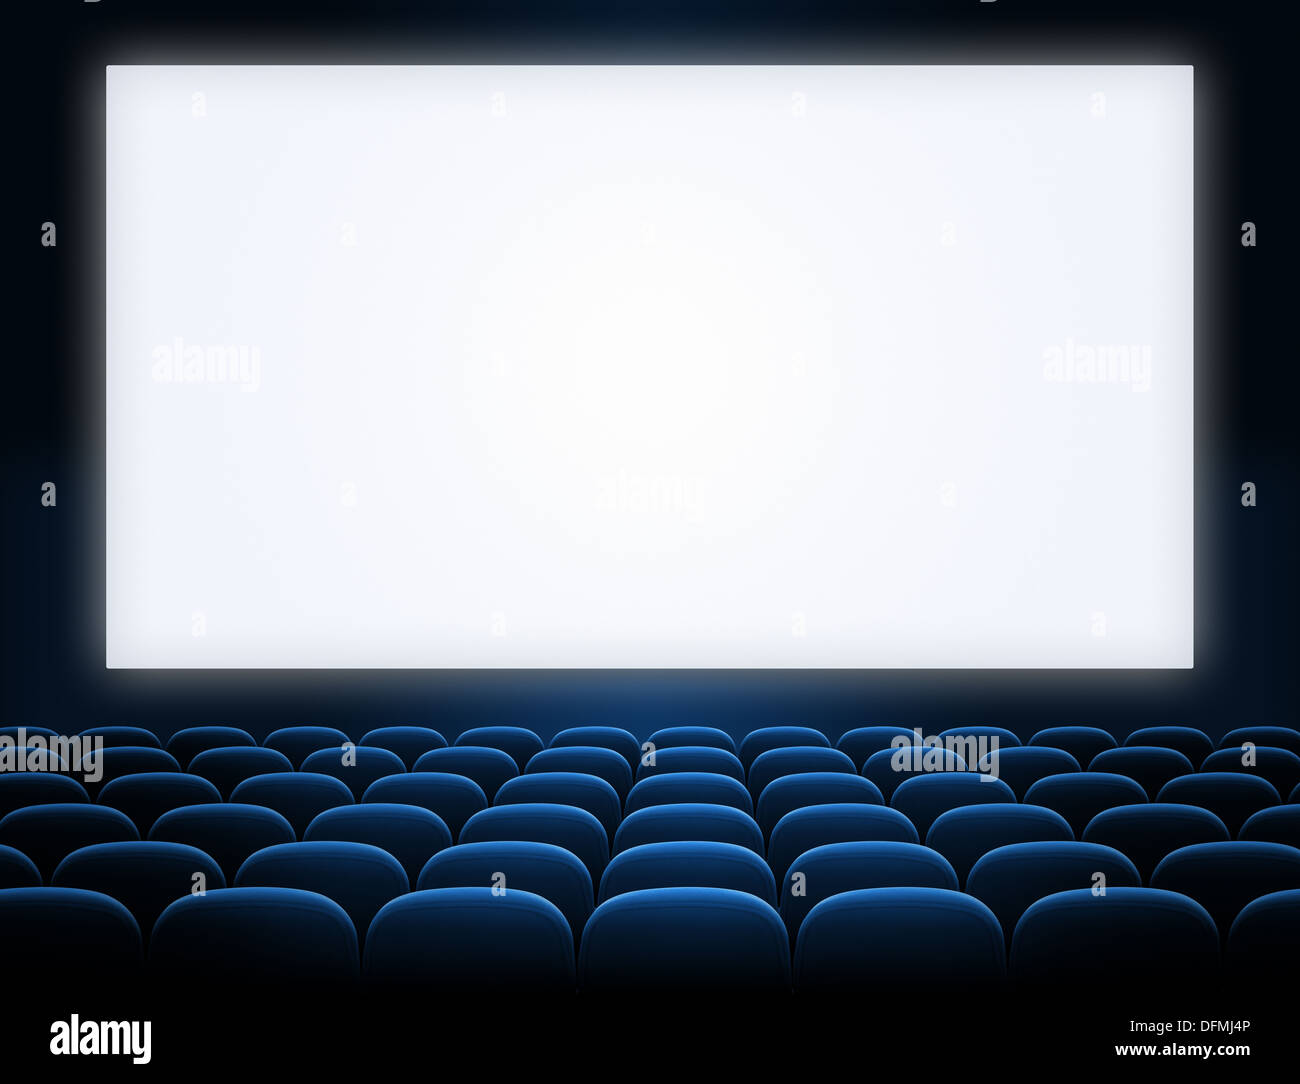 cinema screen with open blue seats Stock Photo